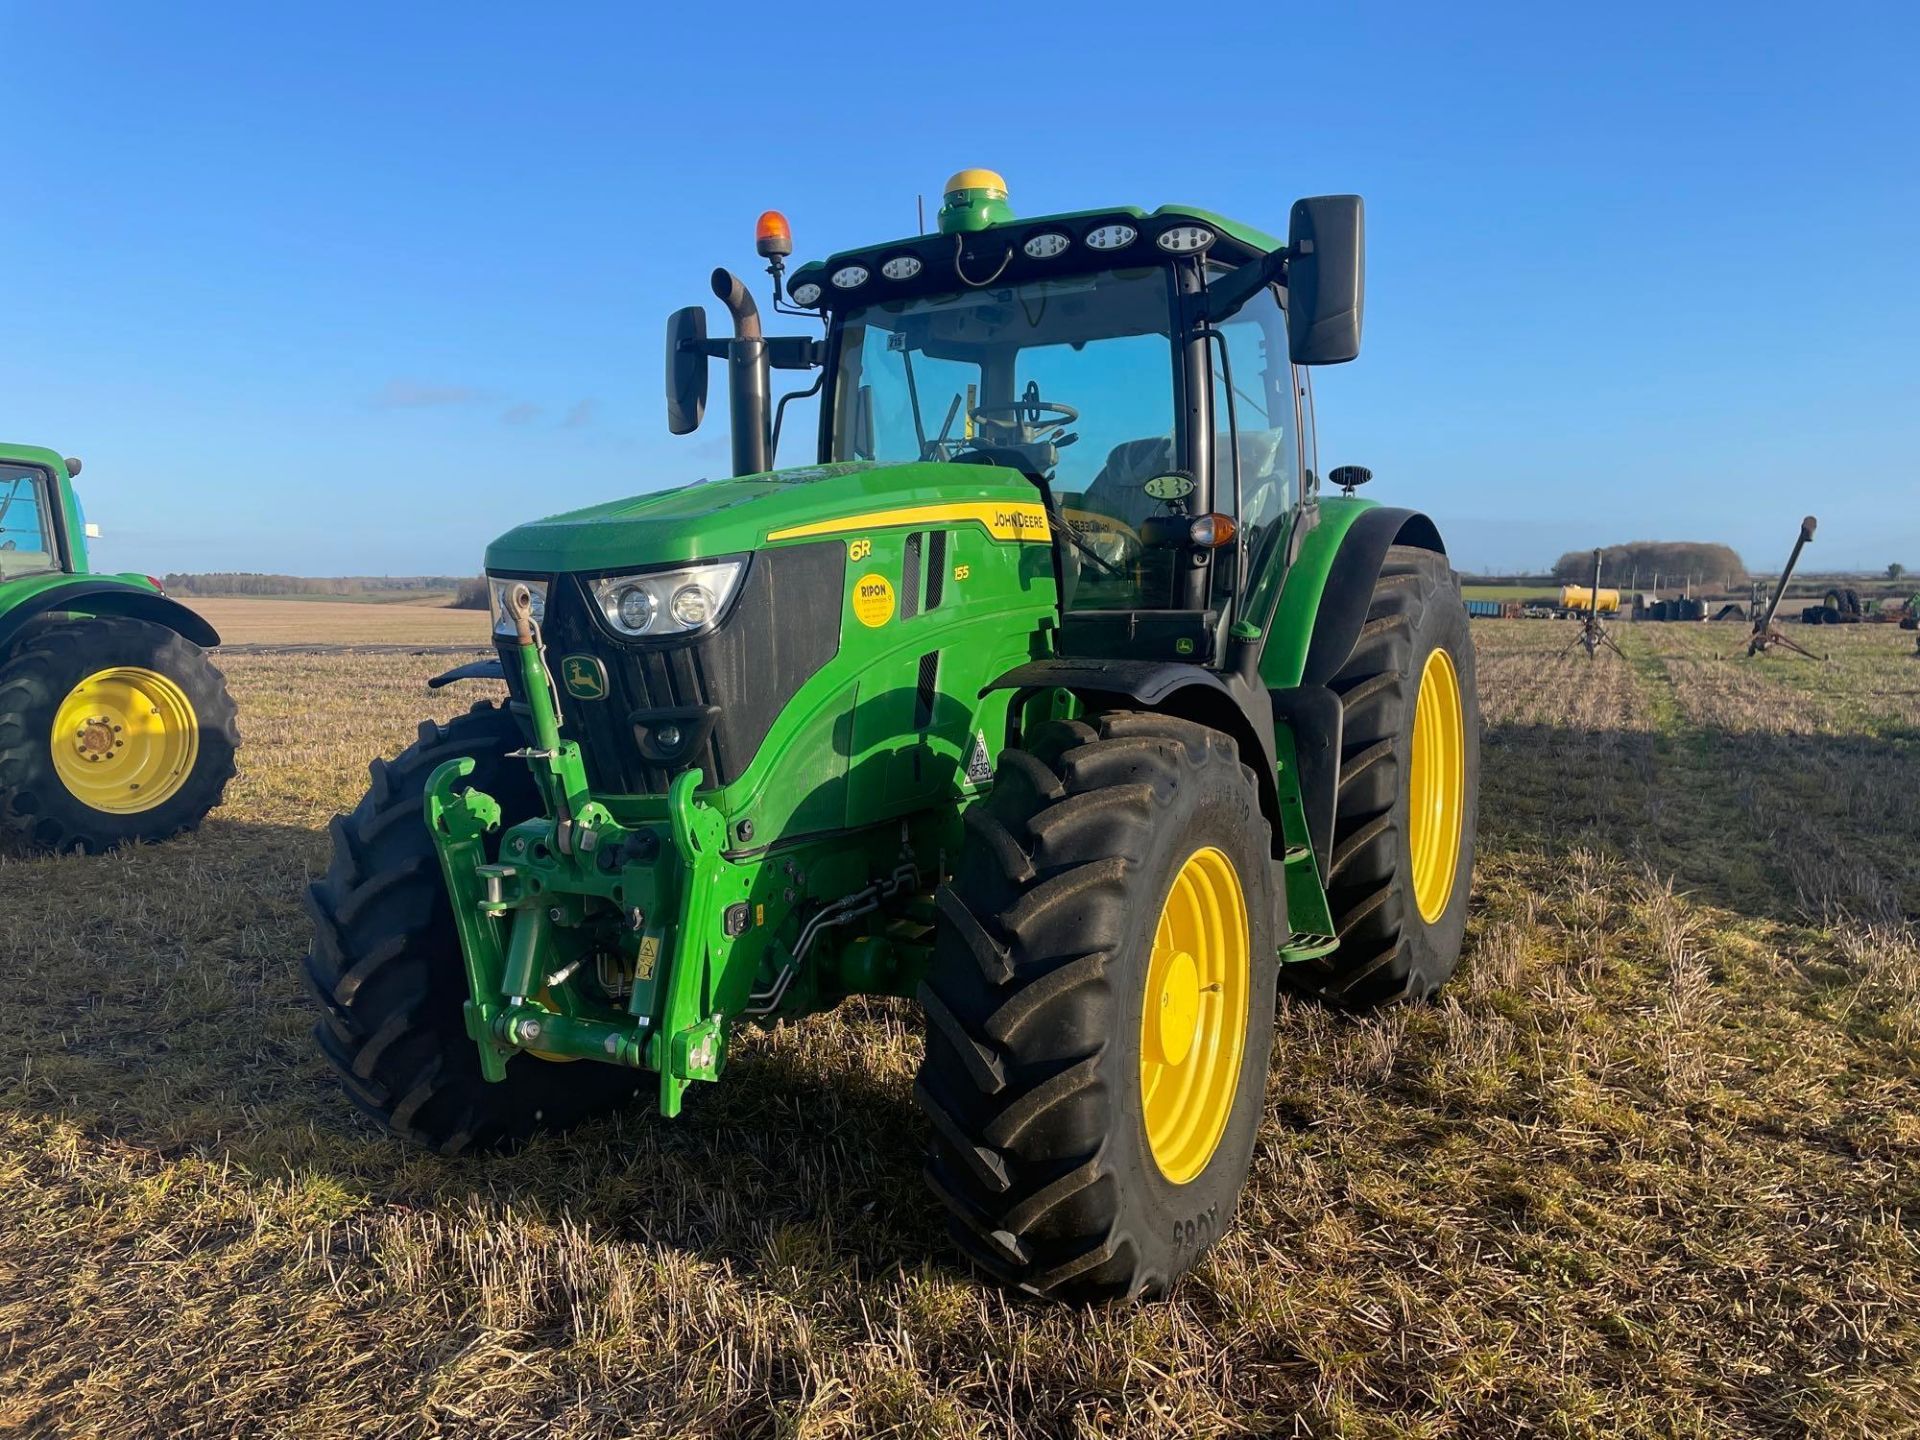 2022 John Deere 6R 155 Power Tech PVS tractor with Auto Power IVT transmission 50kph gearbox, 4WD fr - Image 2 of 14